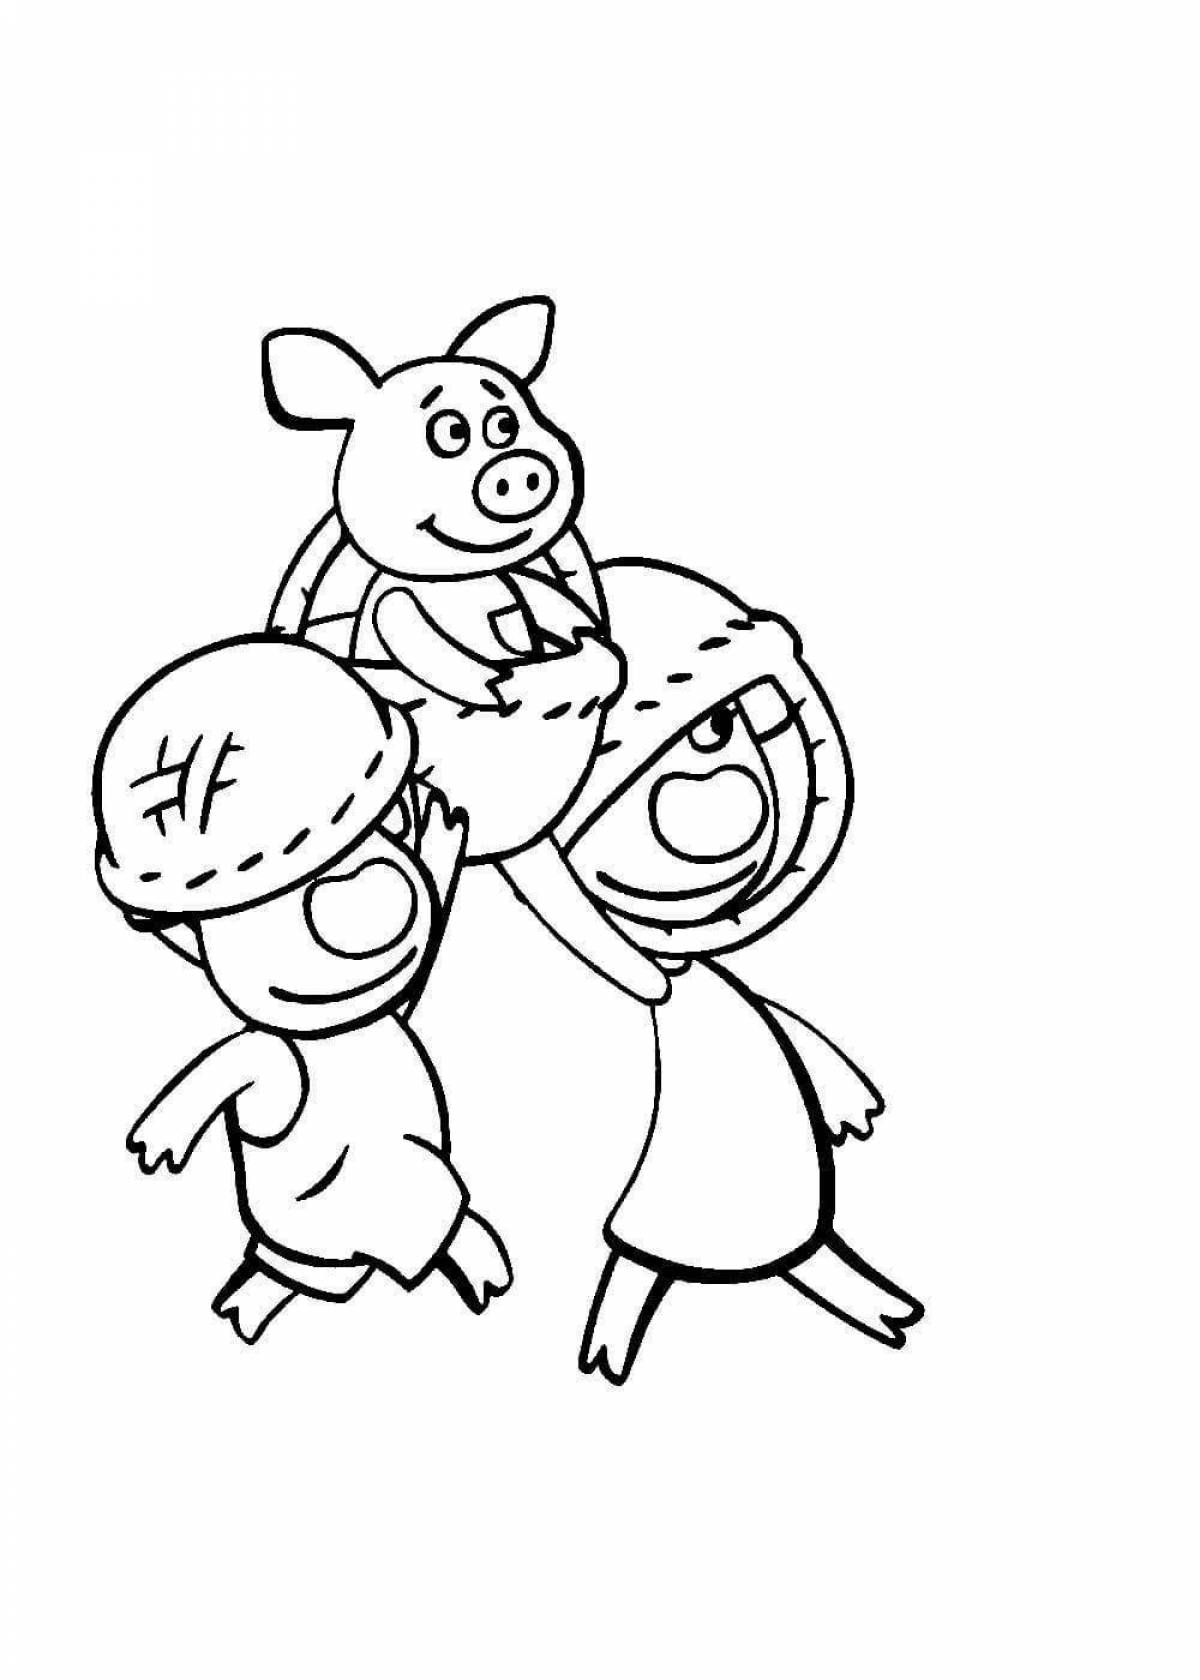 Bright bo and zo coloring pages